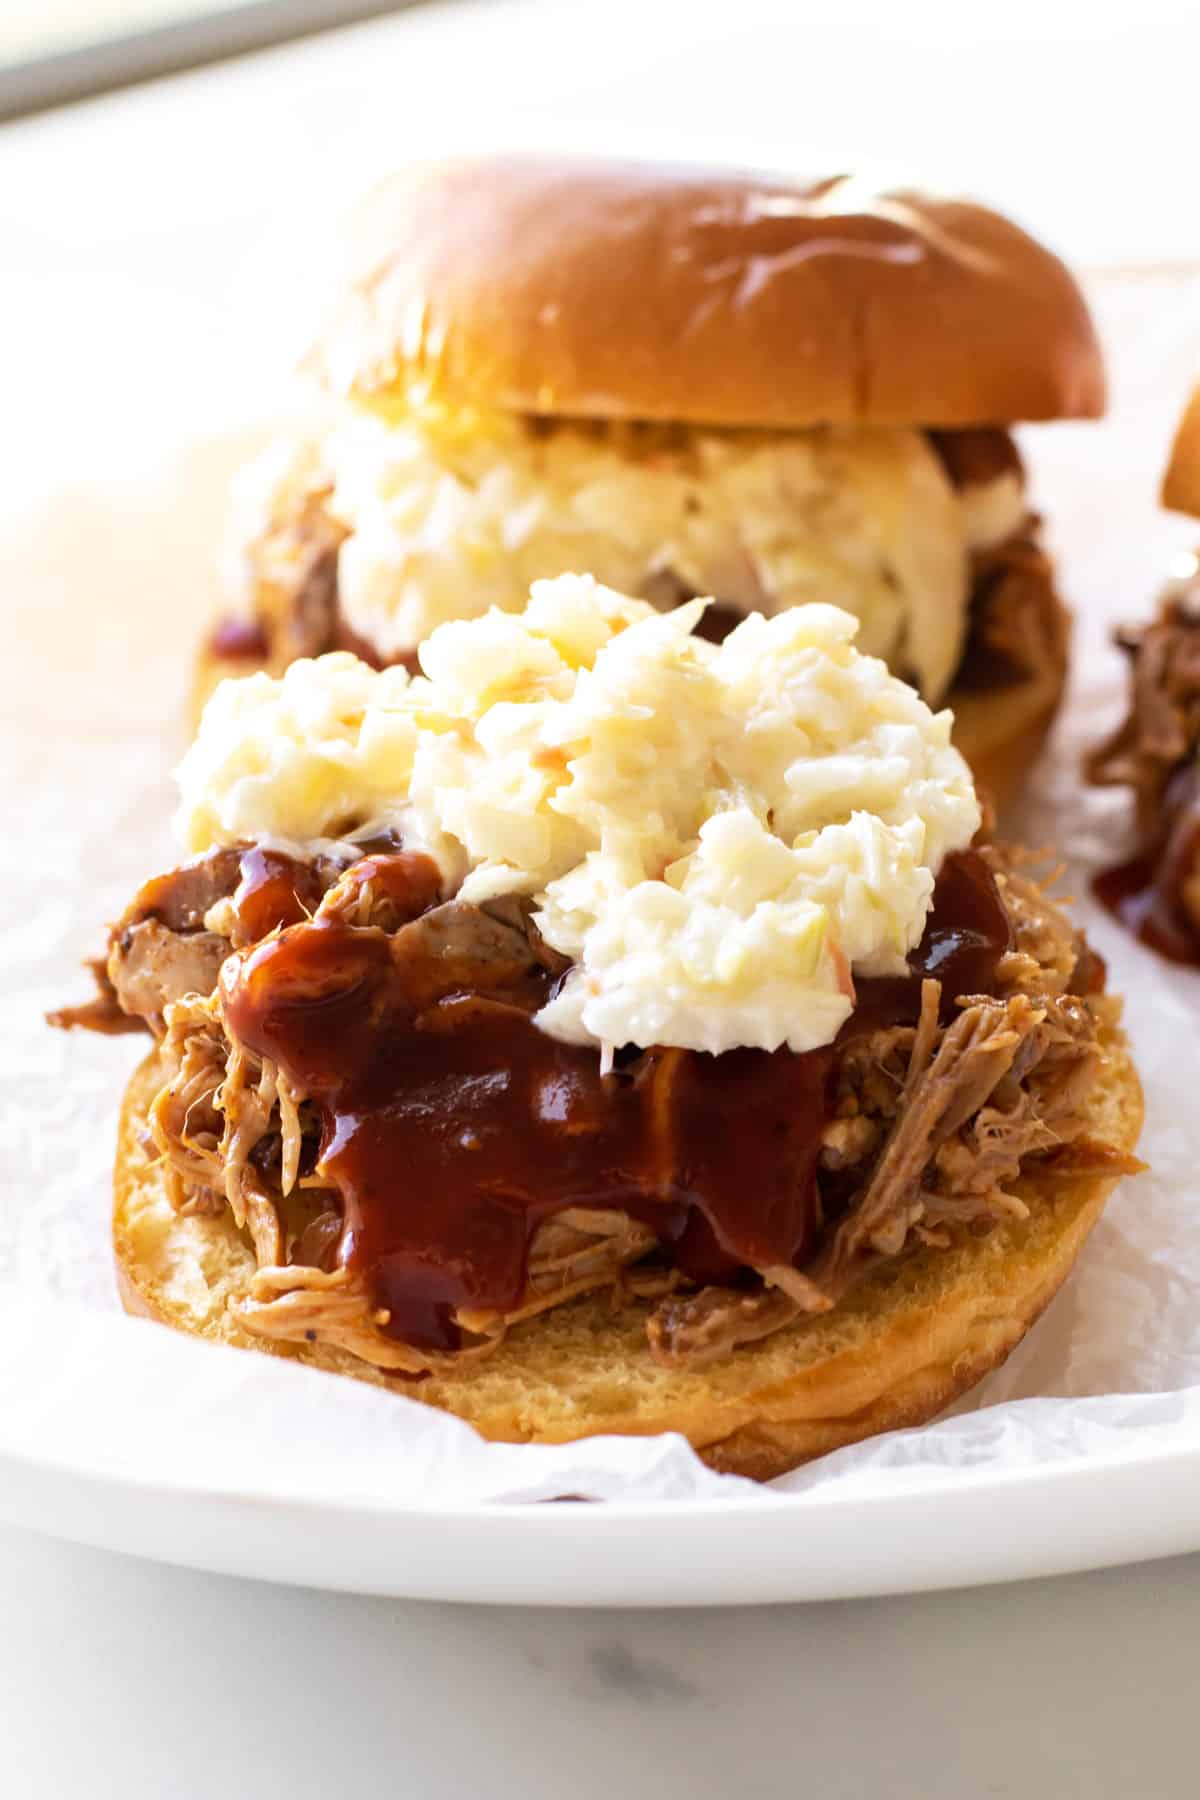 a open faced sandwich topped with BBQ sauce and coleslaw.